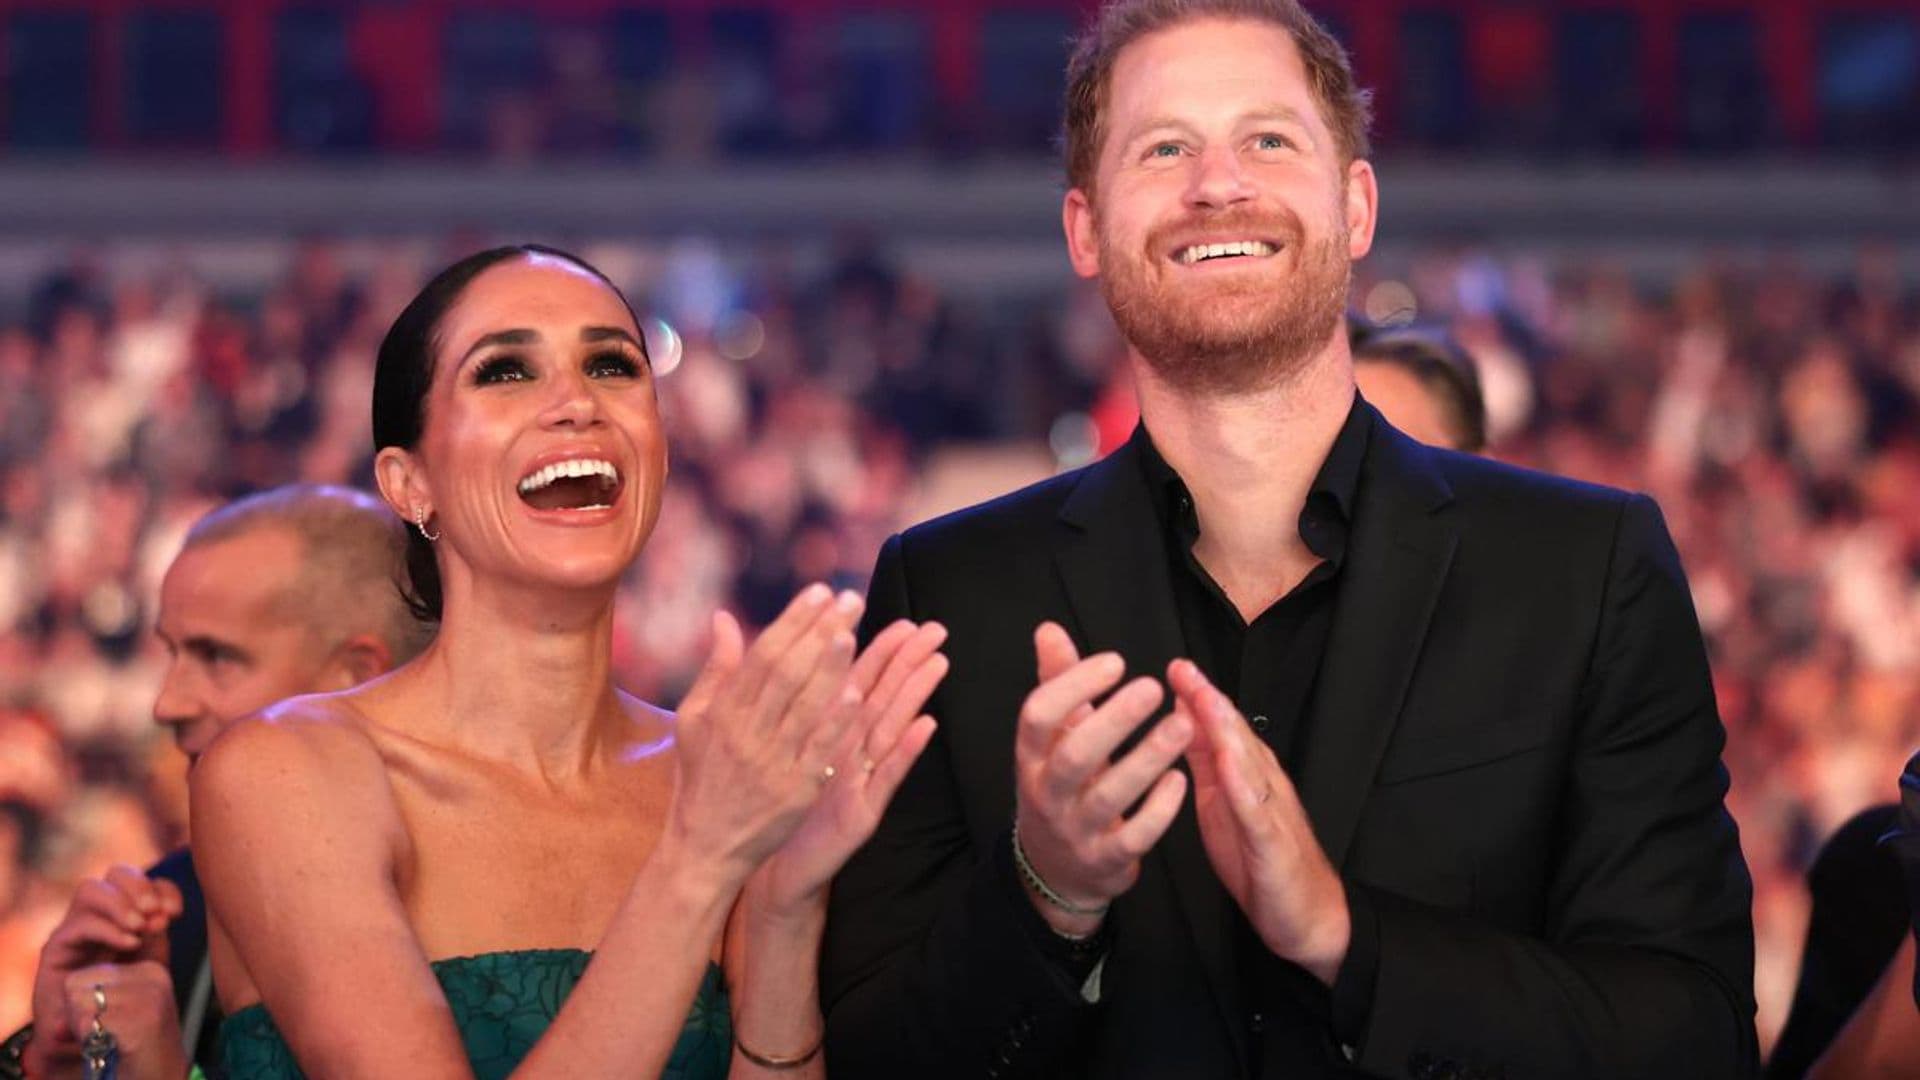 Meghan Markle and Prince Harry launch new website!